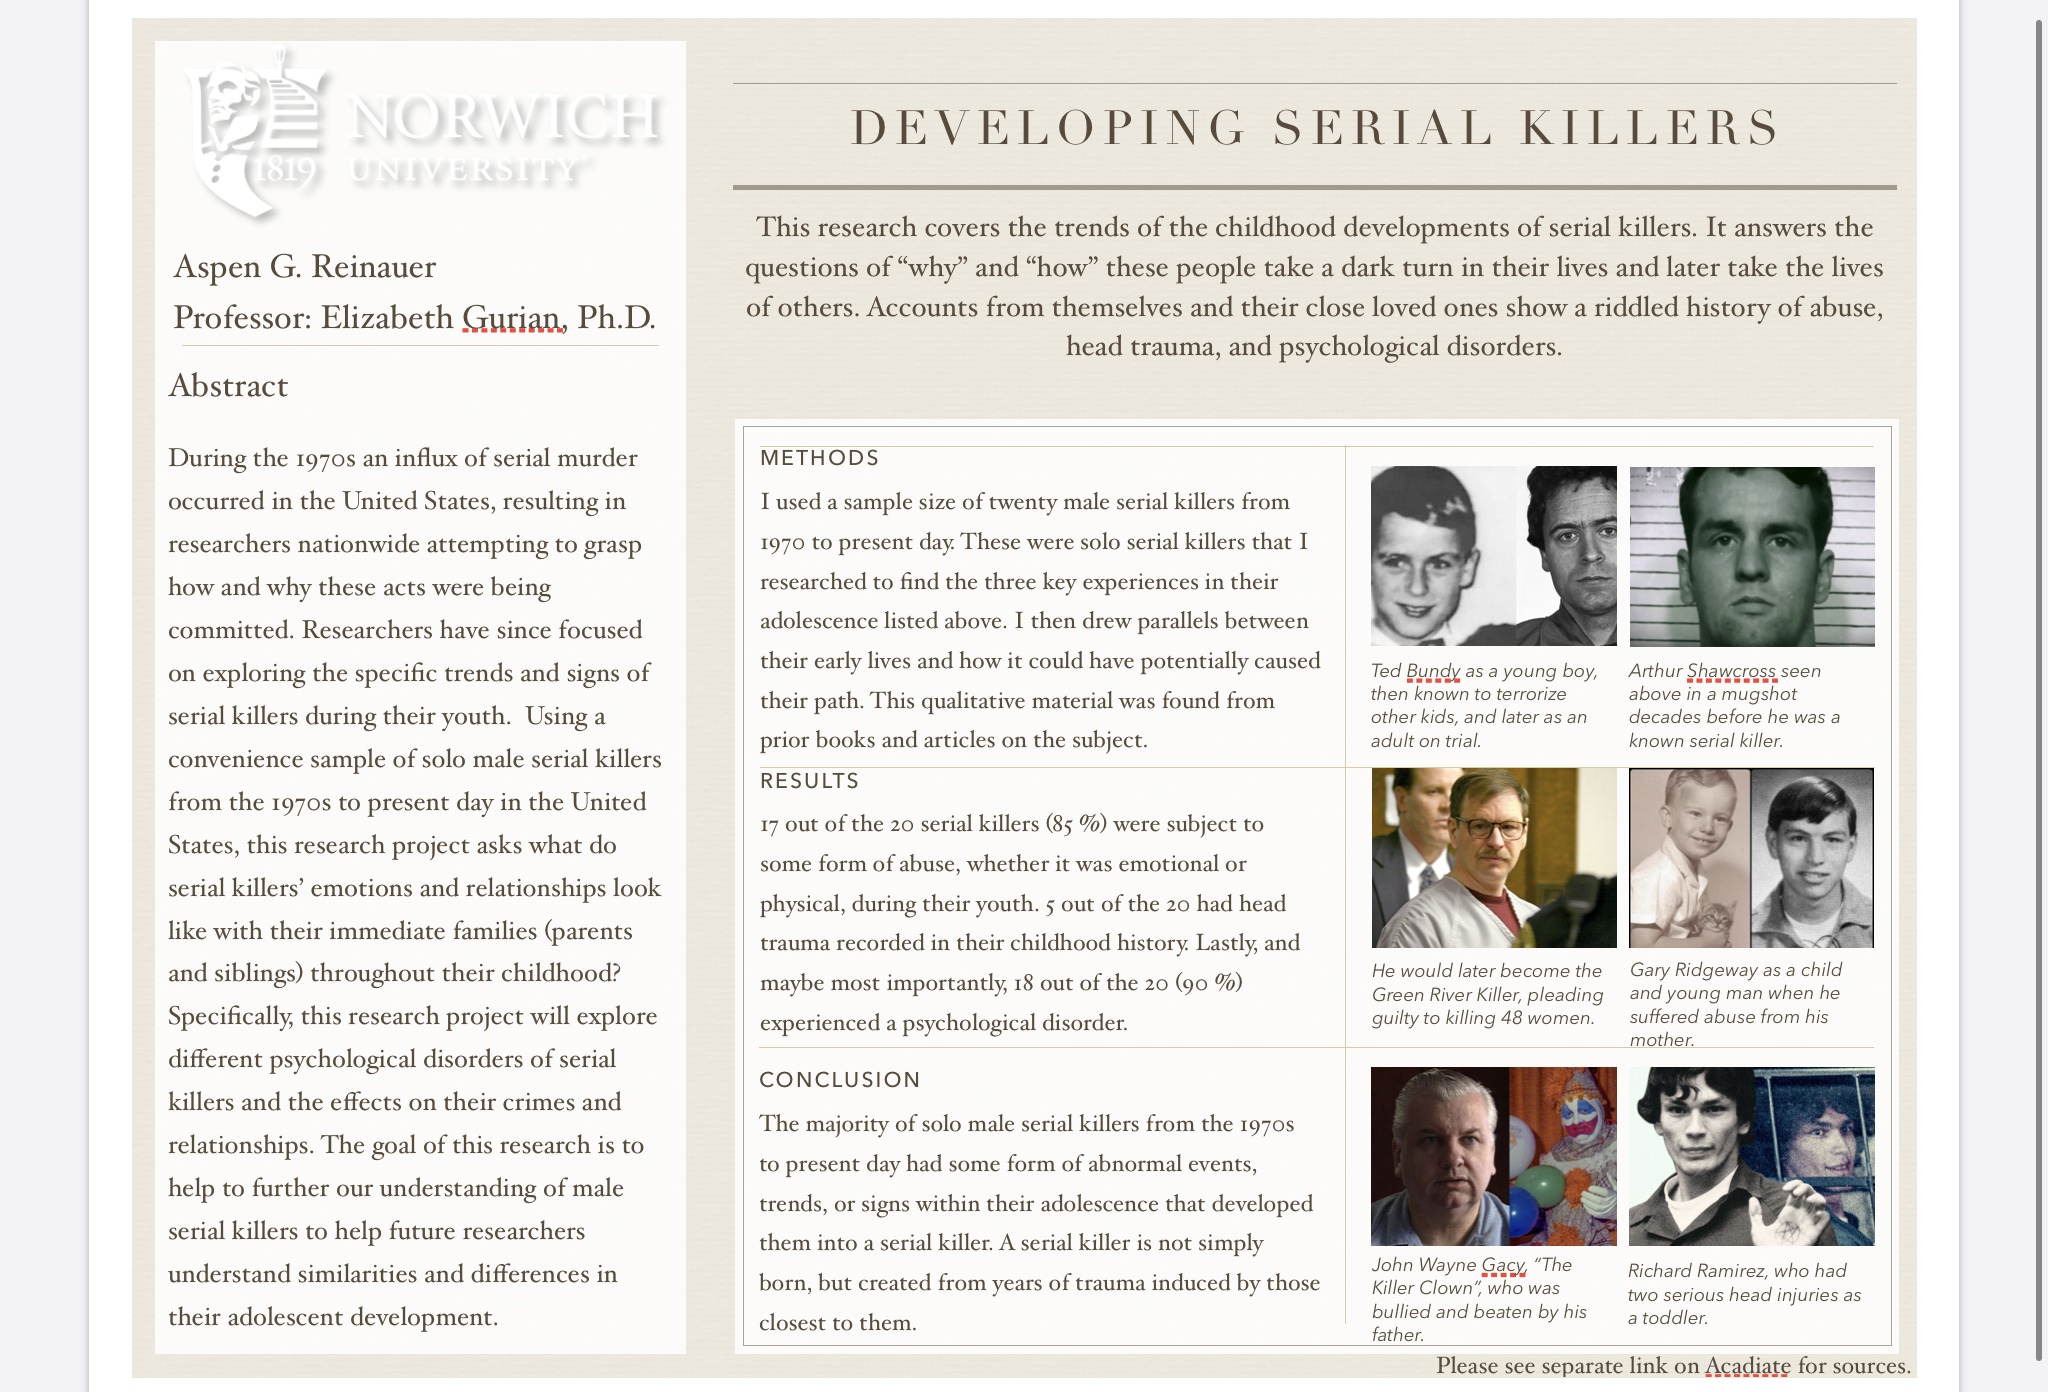 Showcase Image for Developing Serial Killers